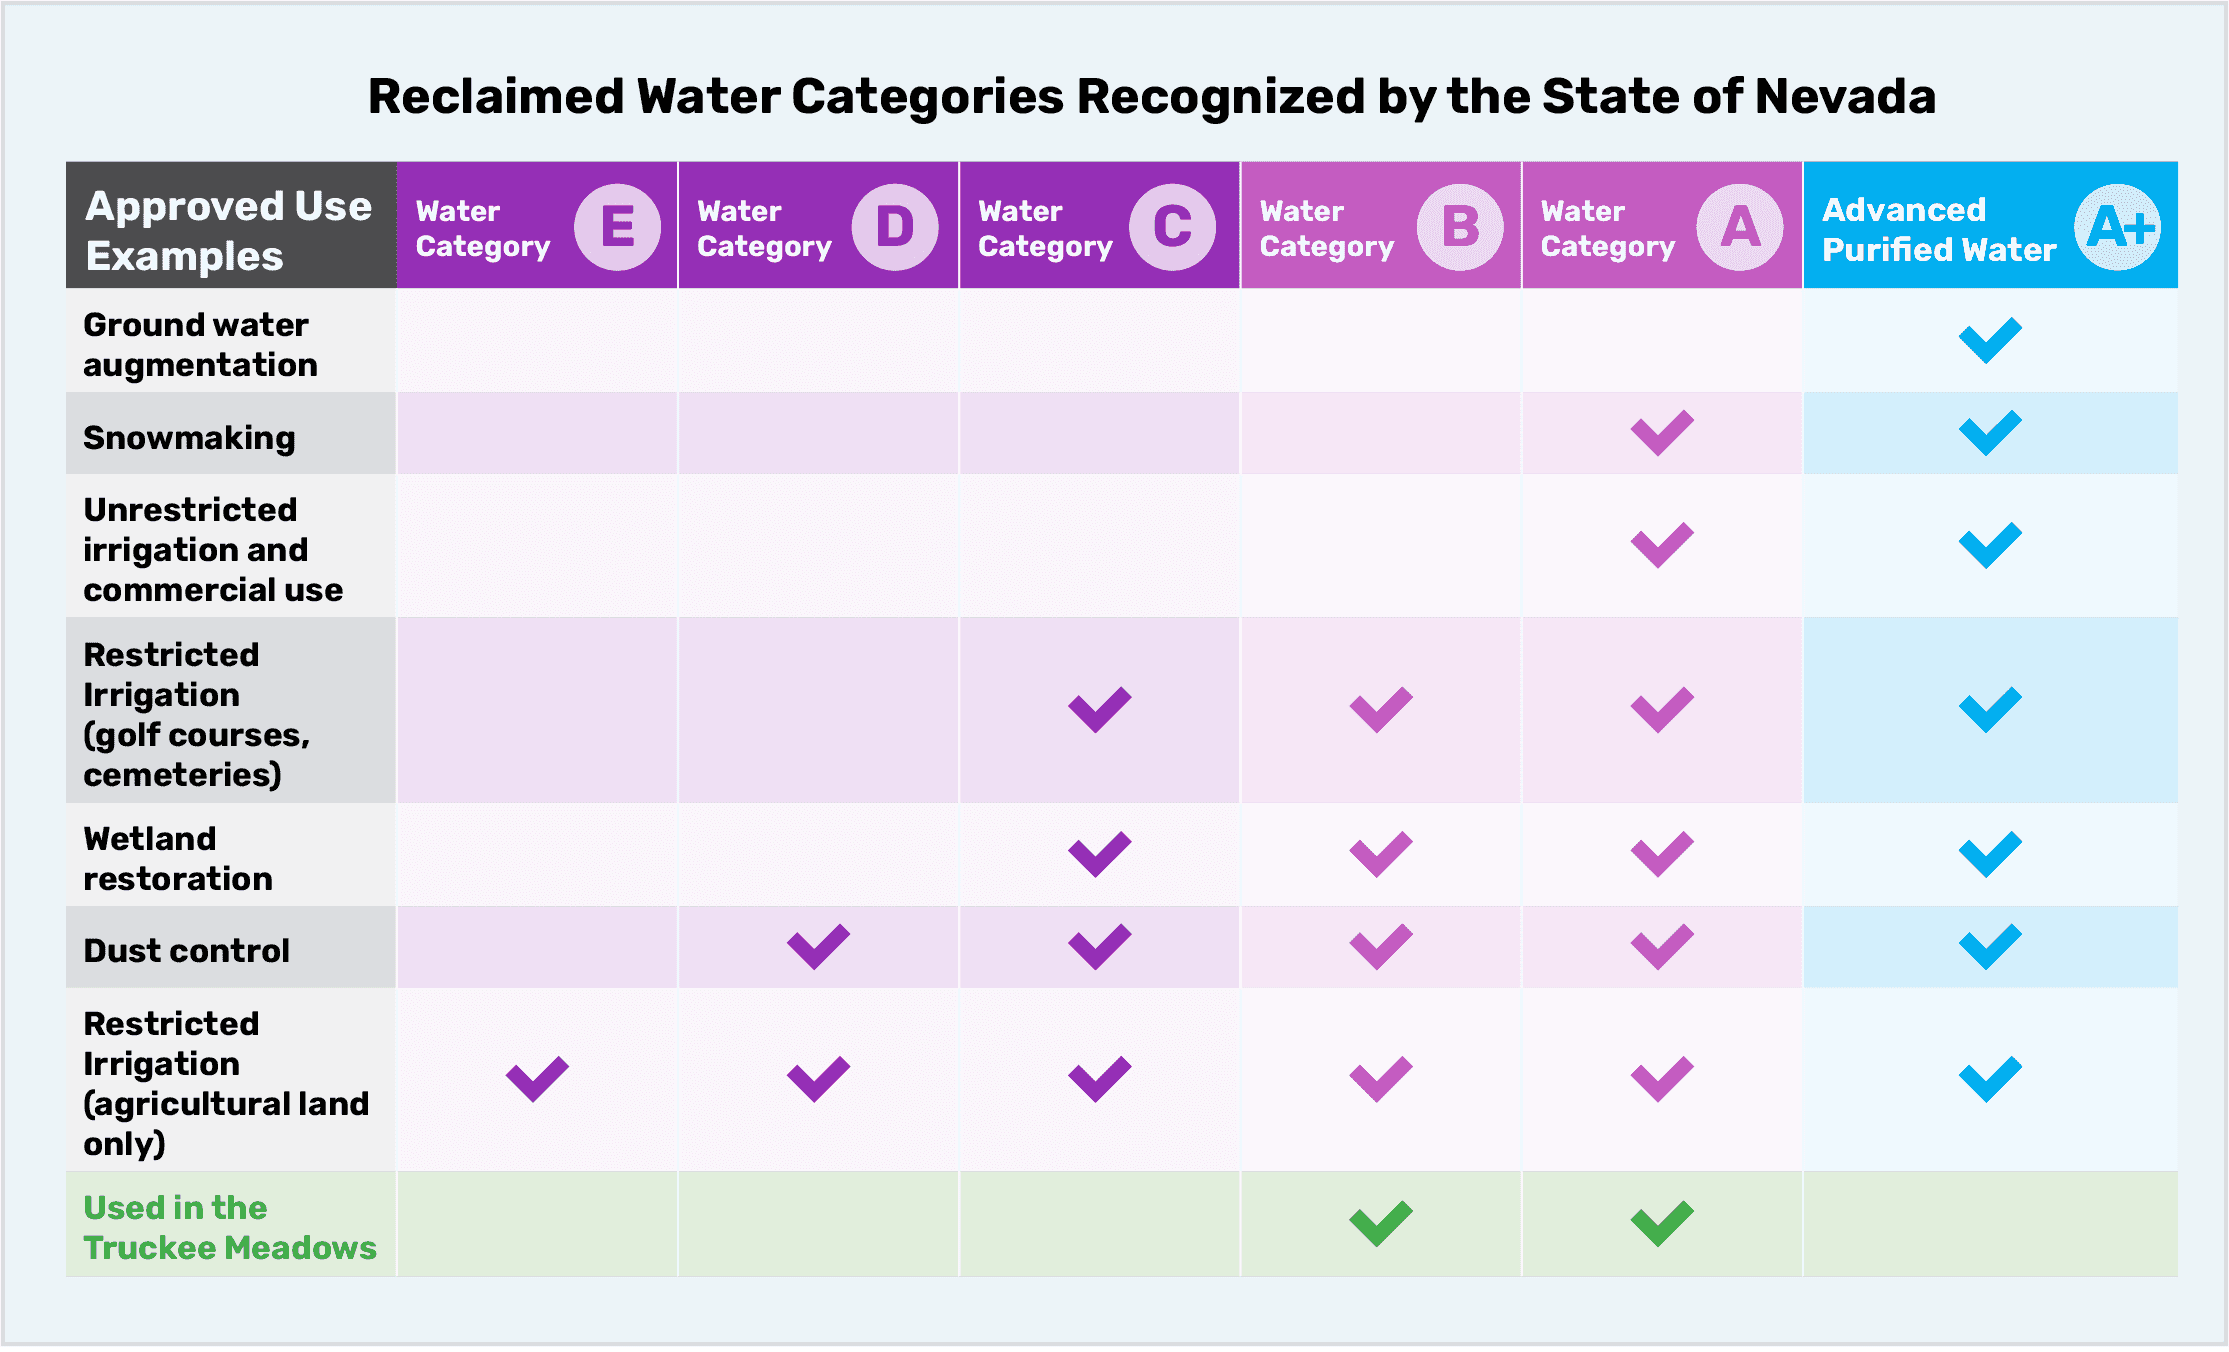 Reclaimed Water Categories Recognized by the State of Nevada